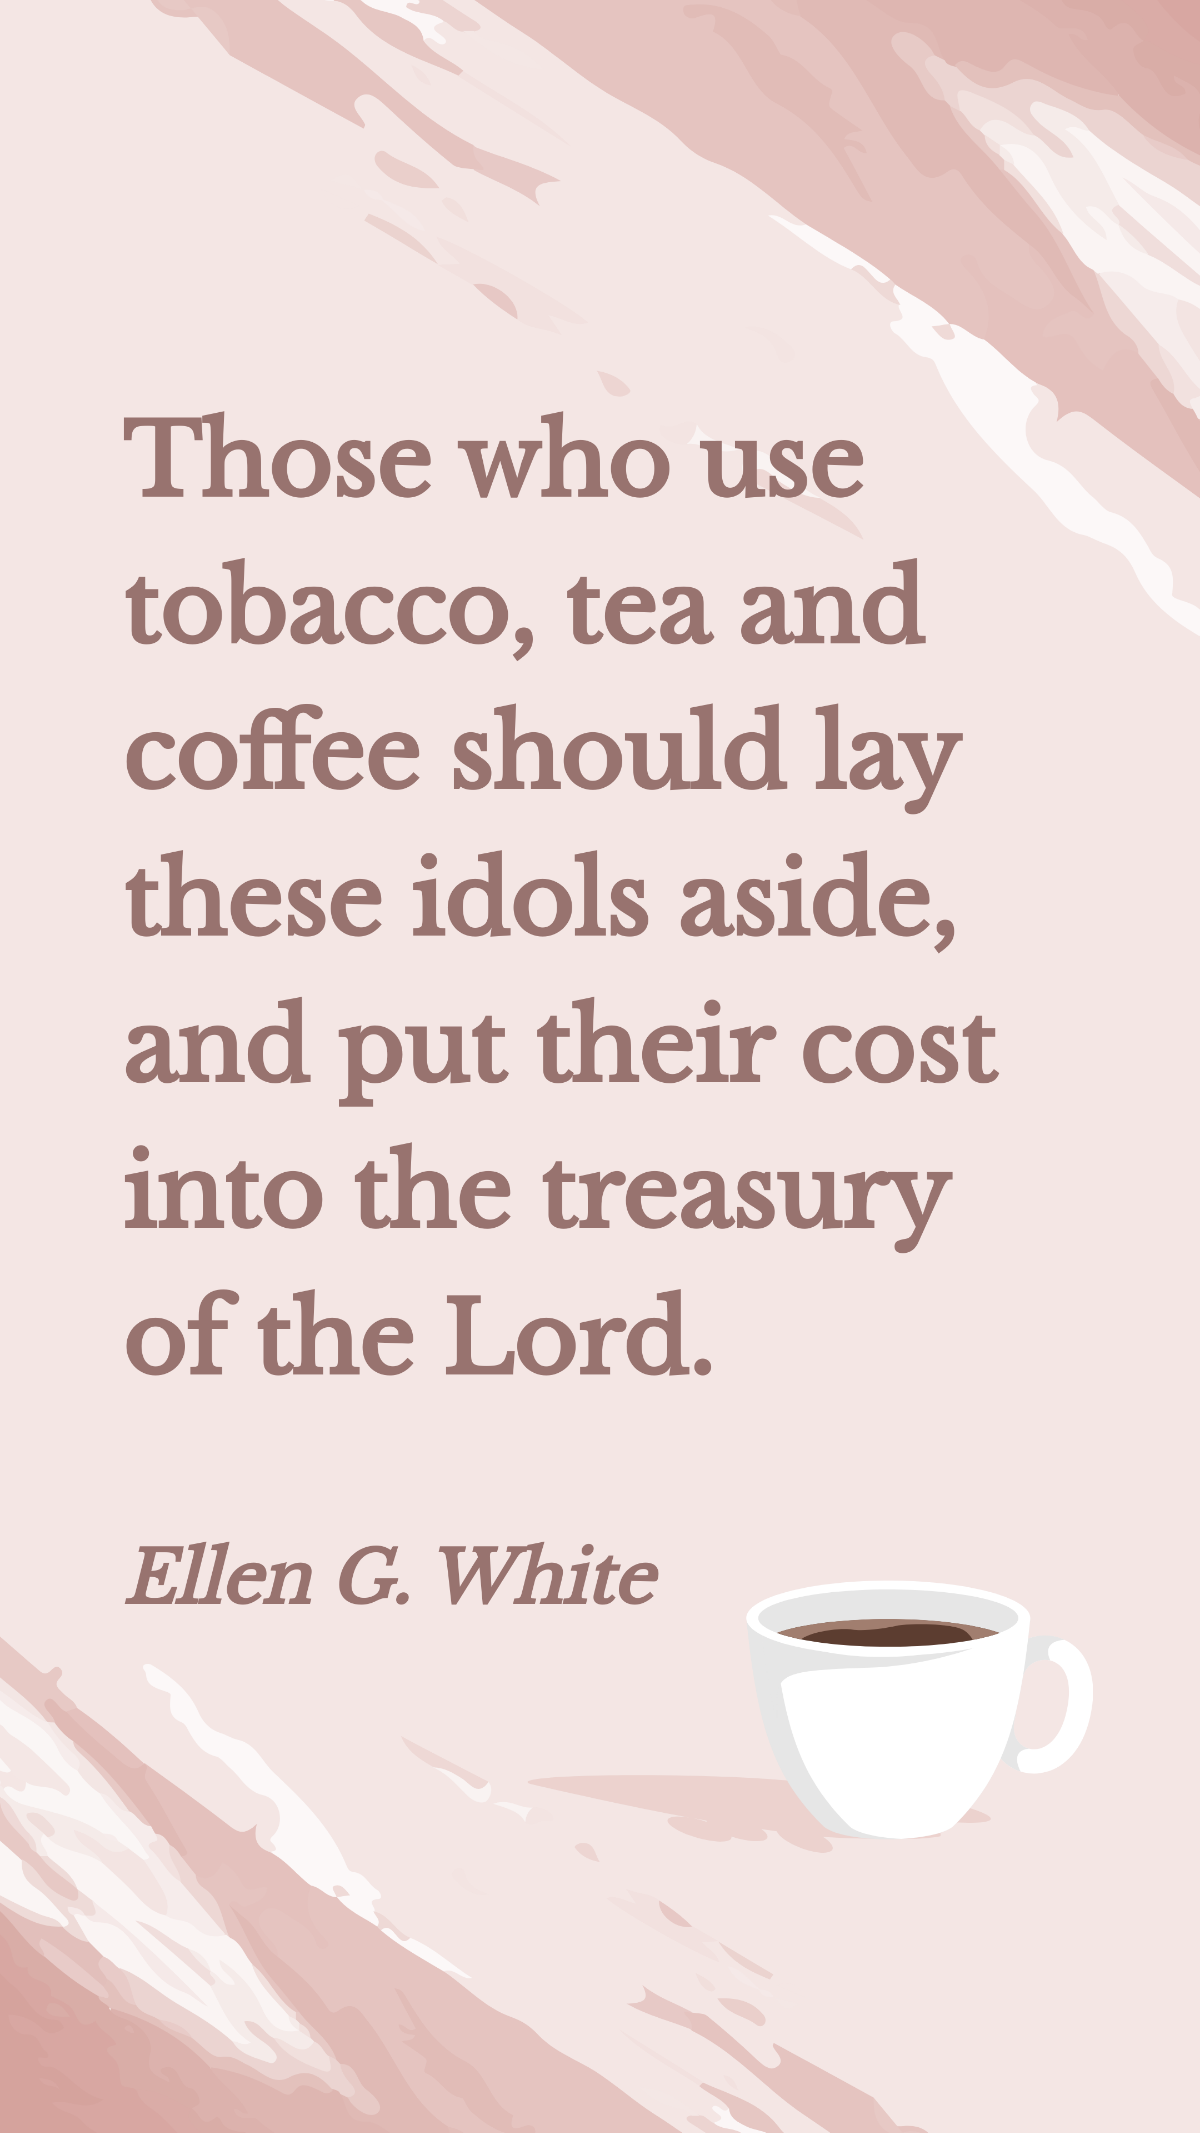 Ellen G. White - Those who use tobacco, tea and coffee should lay these idols aside, and put their cost into the treasury of the Lord. Template